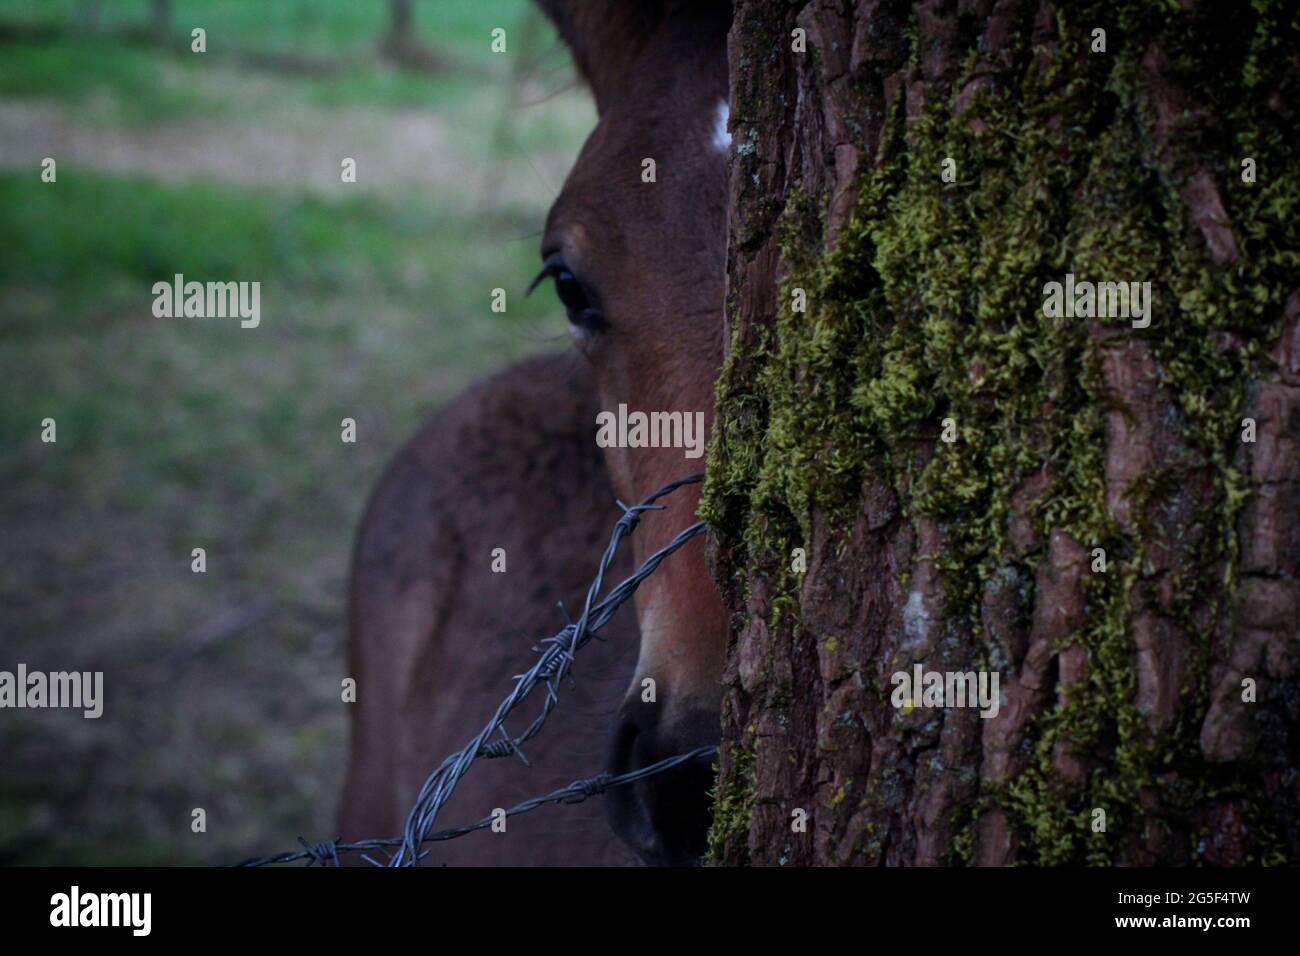 A young and shy horse hiding behind a tree with barbed wire Stock Photo